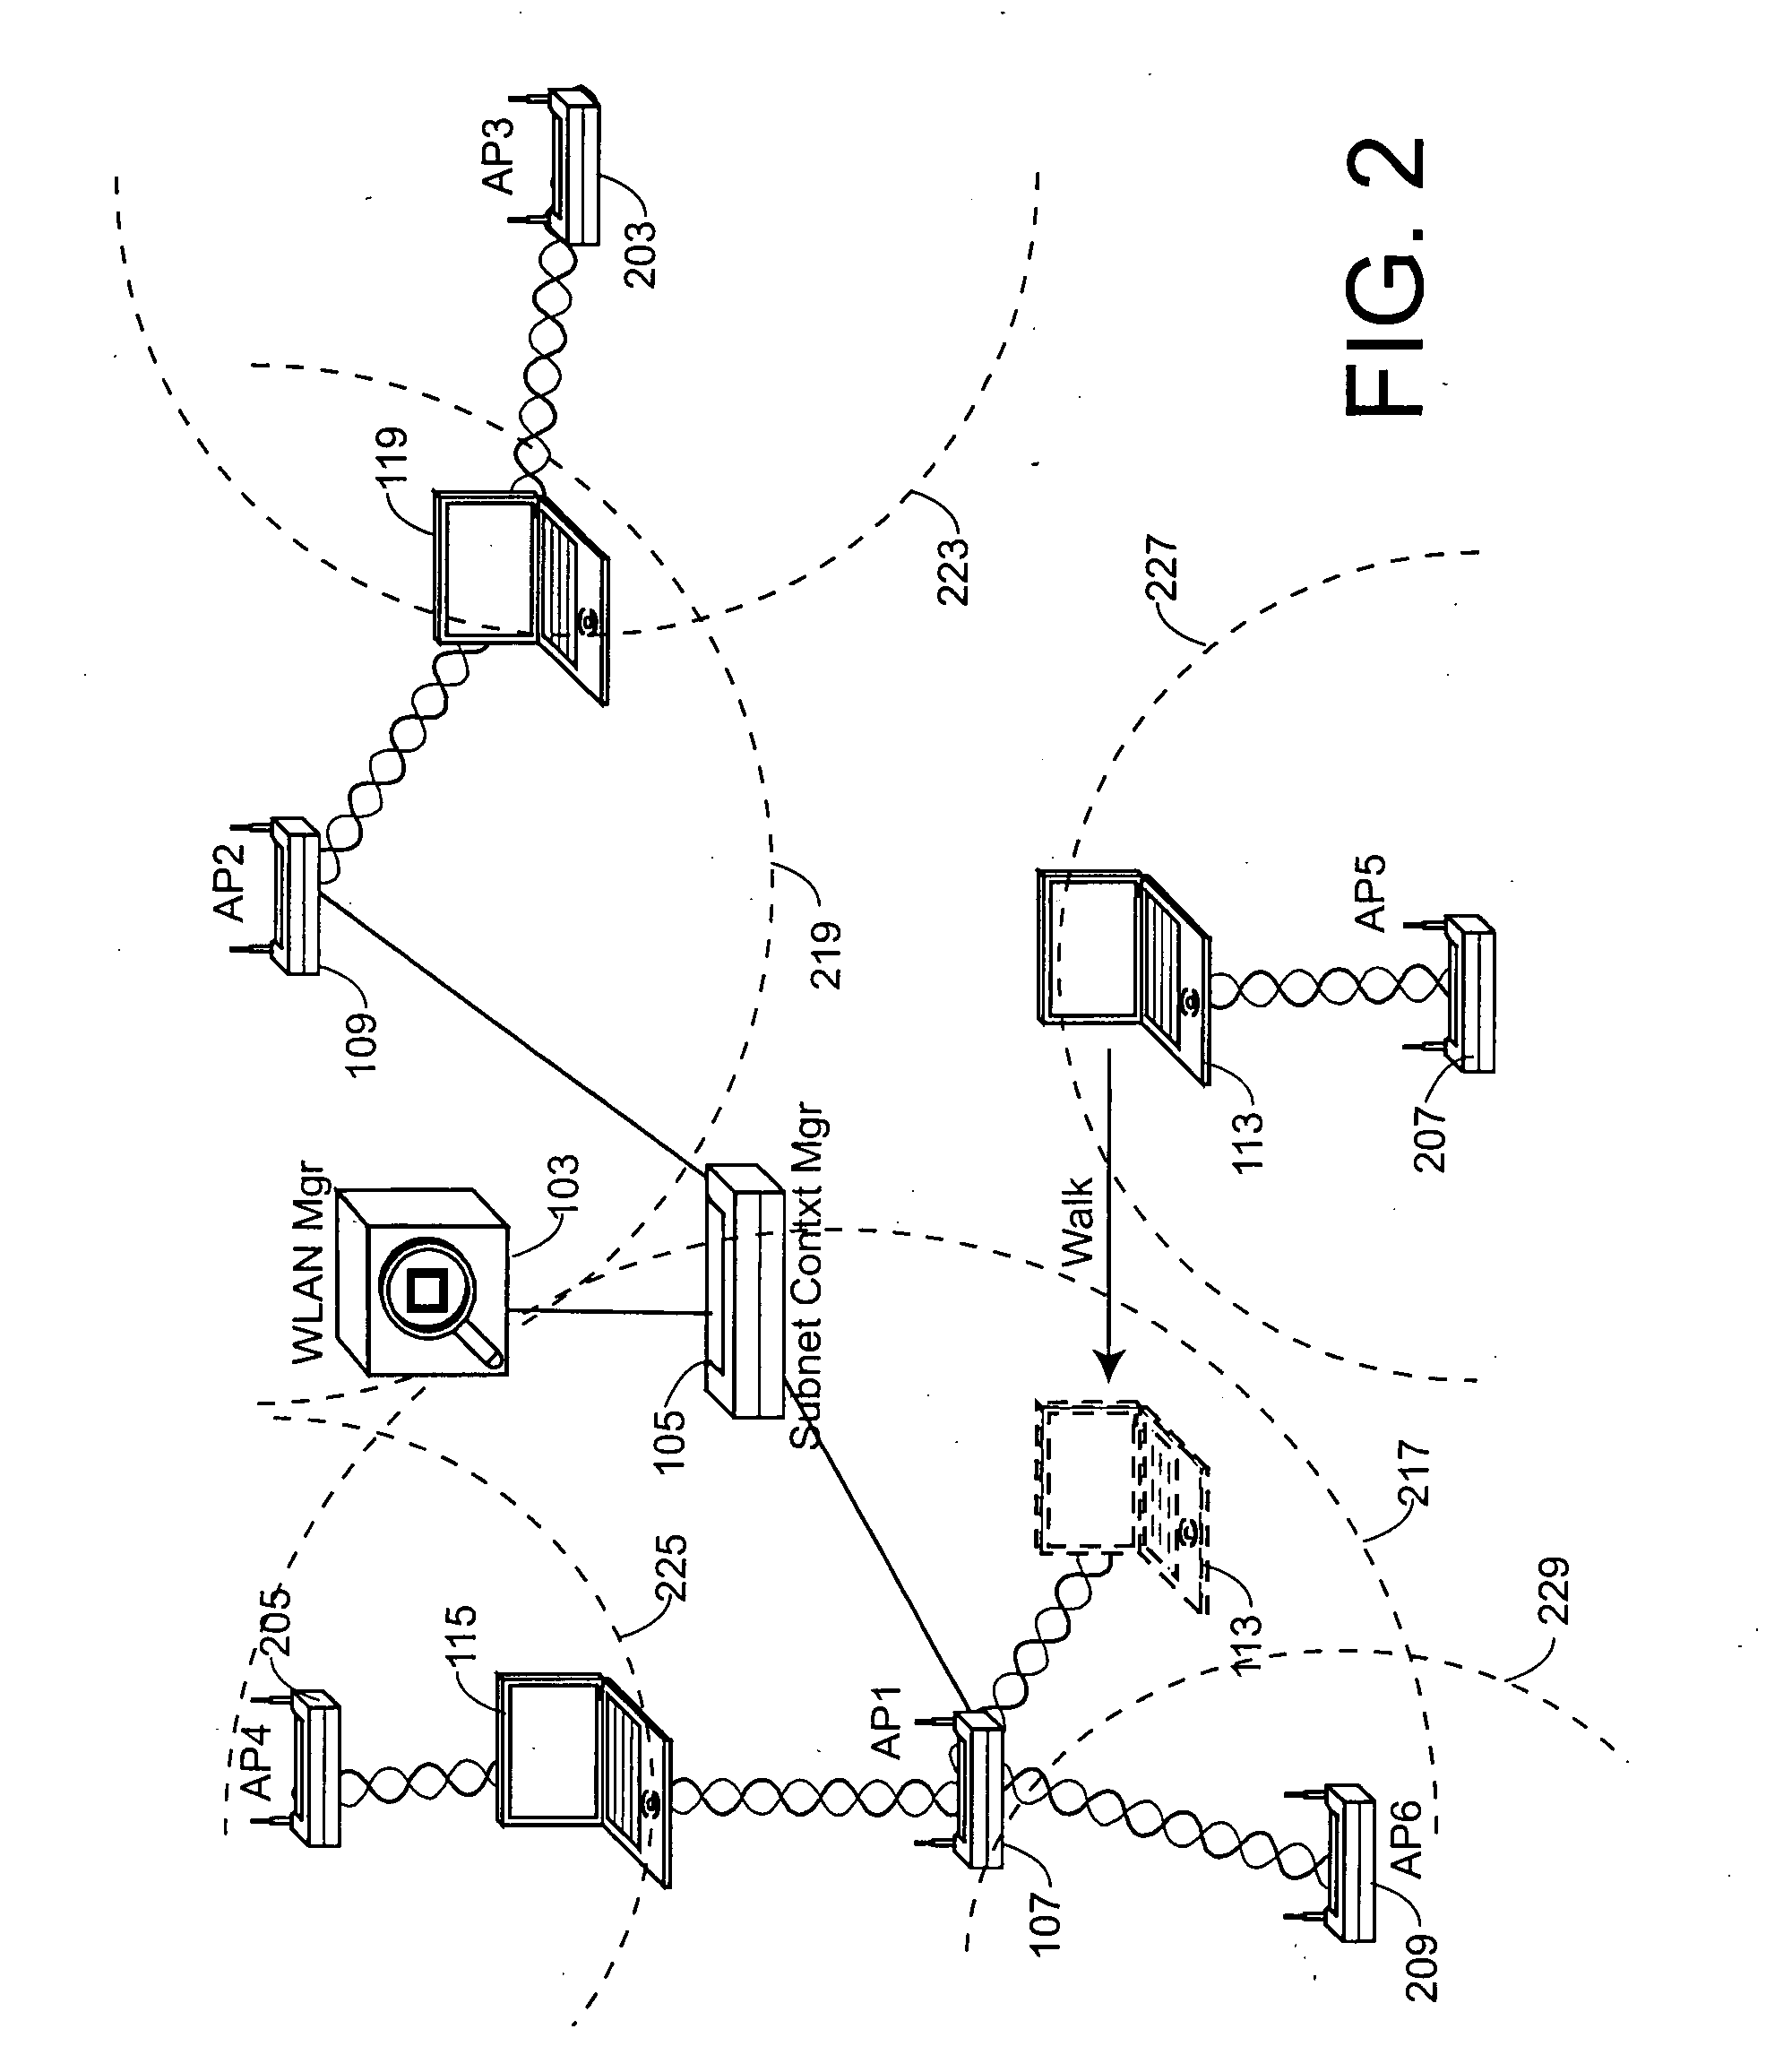 Method and apparatus for locating rogue access point switch ports in a wireless network related patent applications